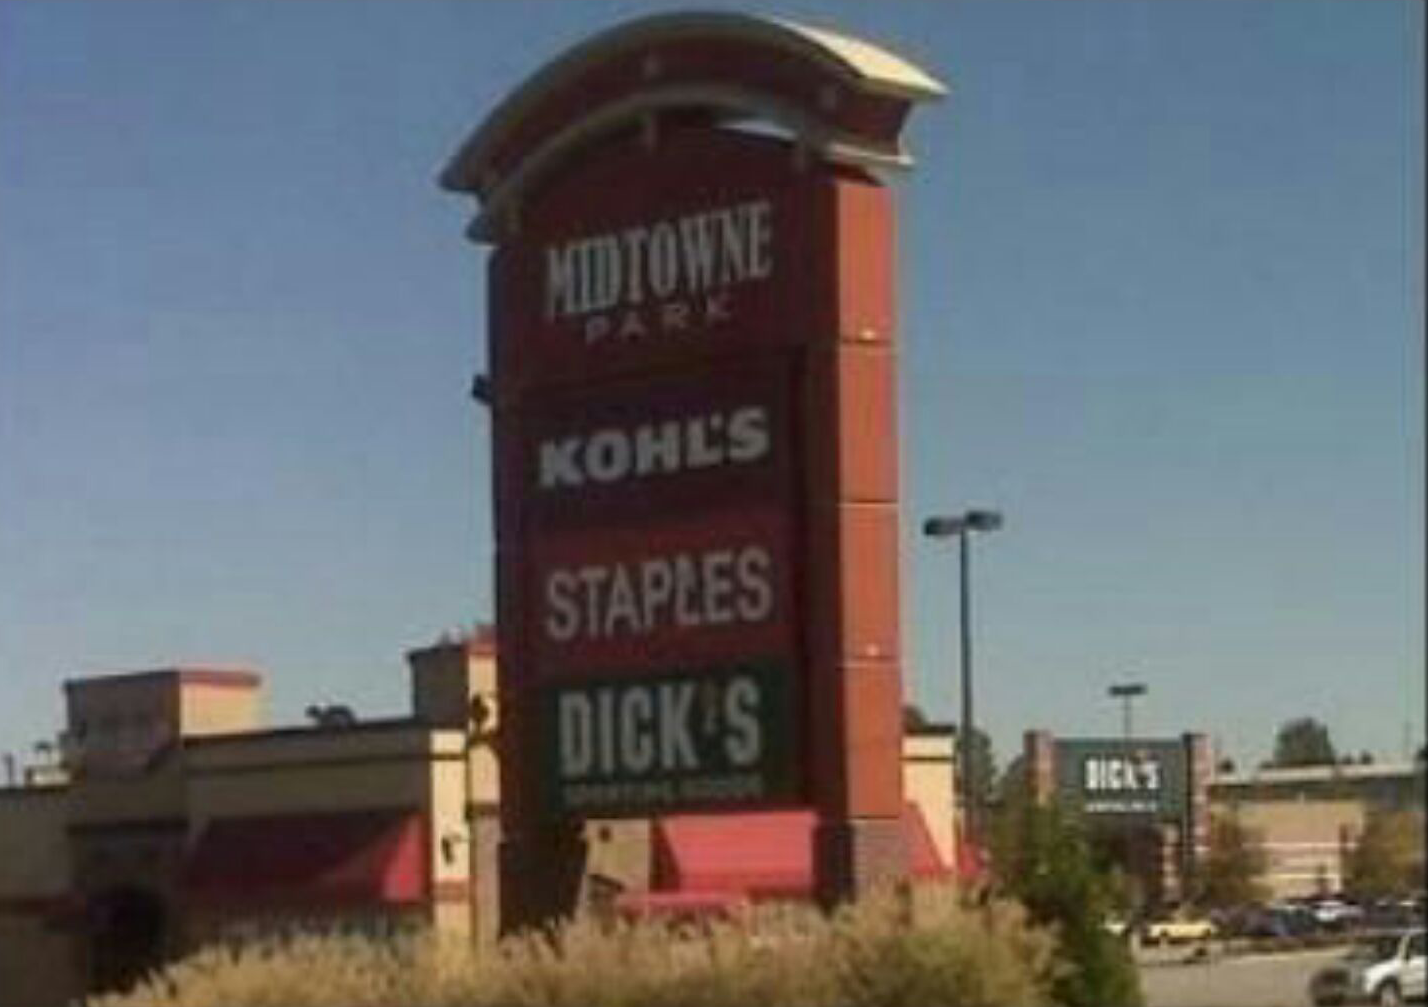 Kohls does what?